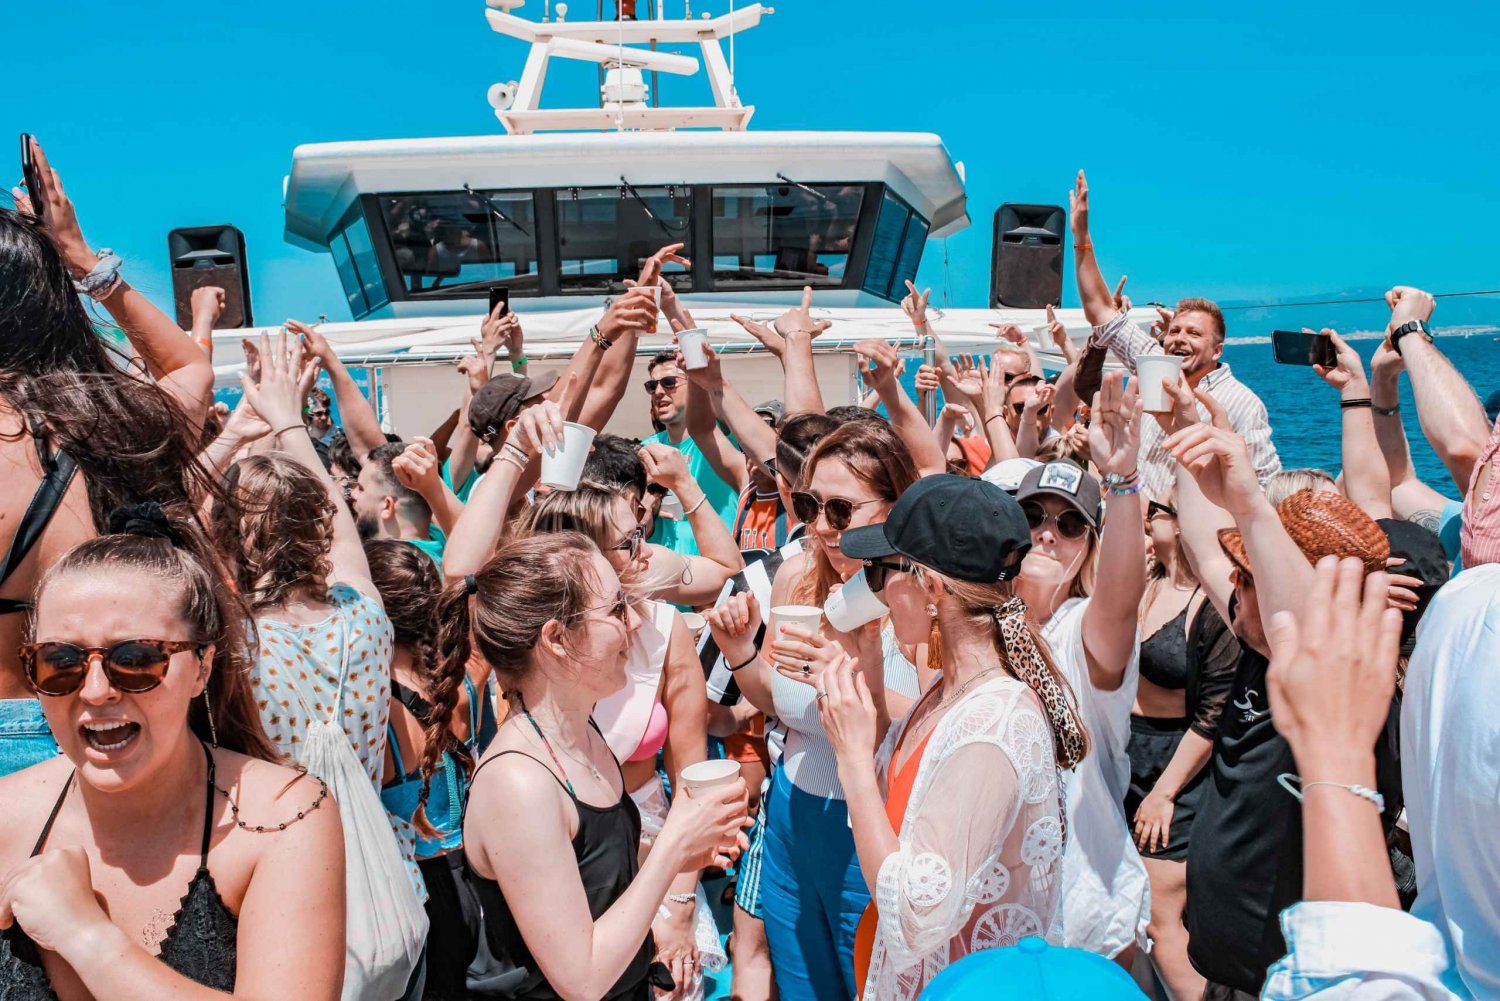 Playa de Palma: Boat Party with DJ, Buffet and Entertainment